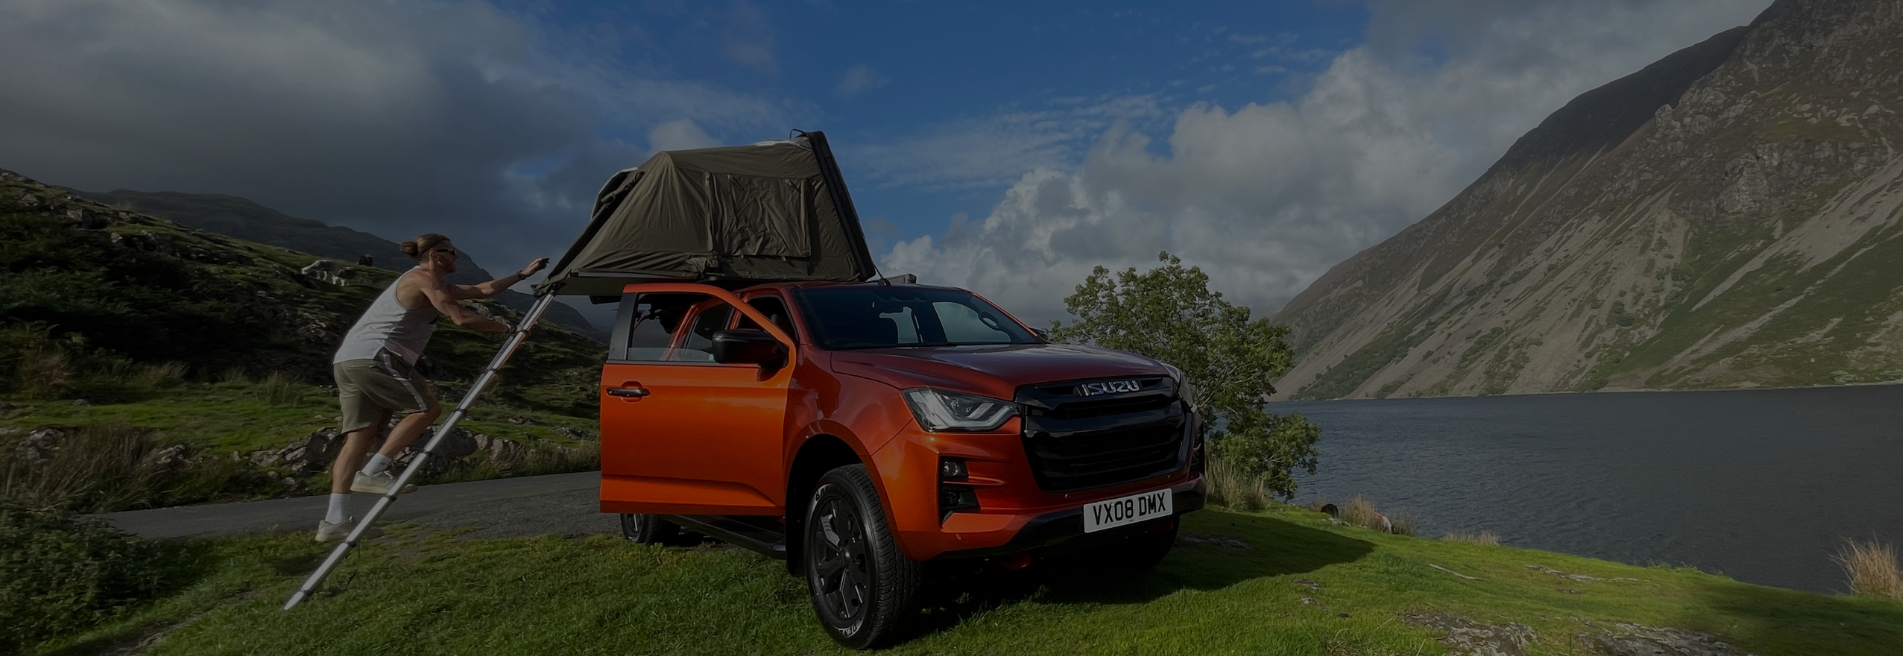 Roof Tent Revelations Break Free From Traditional Camping Desktop